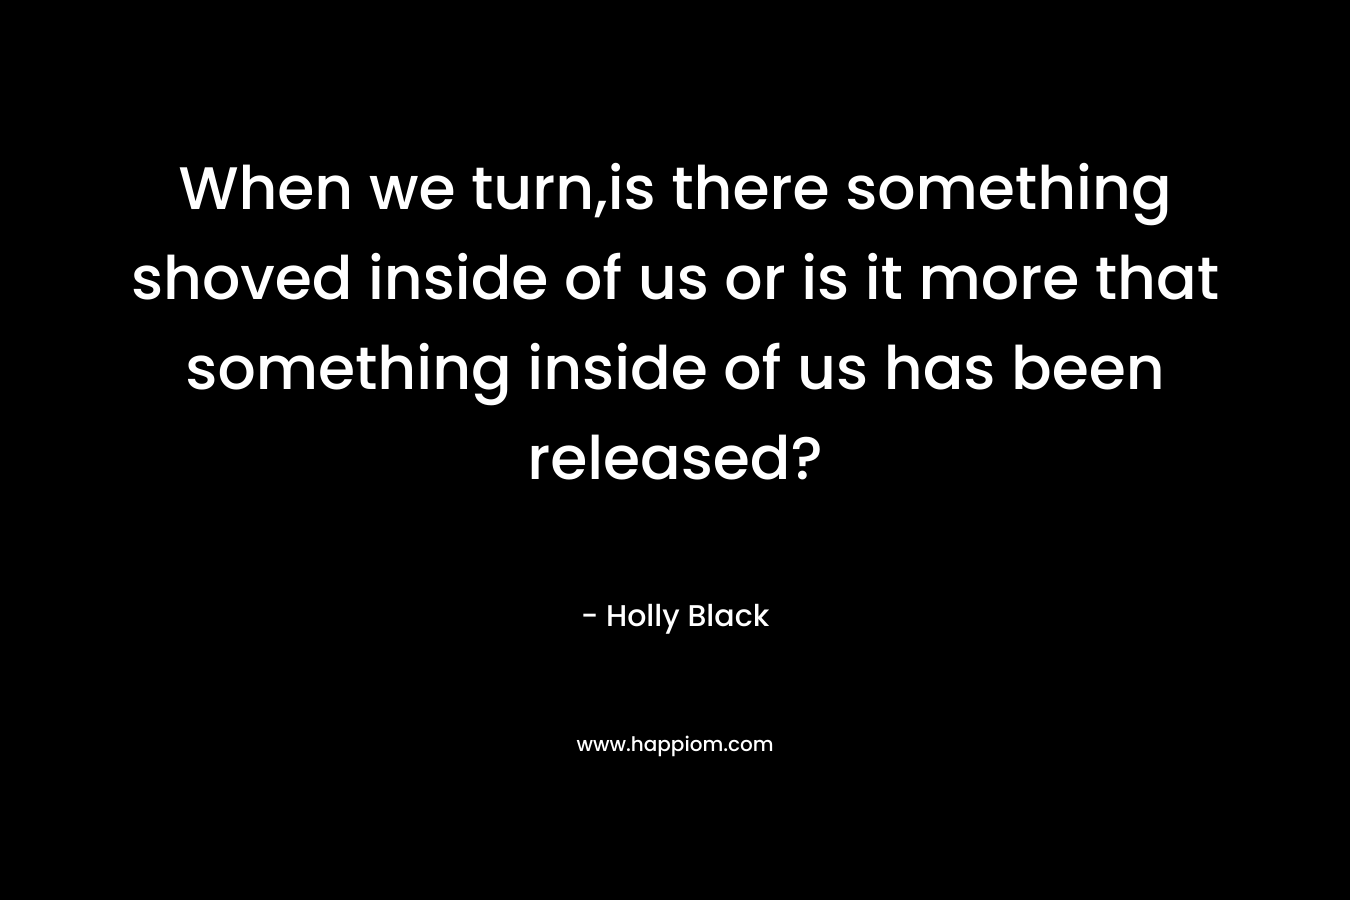 When we turn,is there something shoved inside of us or is it more that something inside of us has been released?